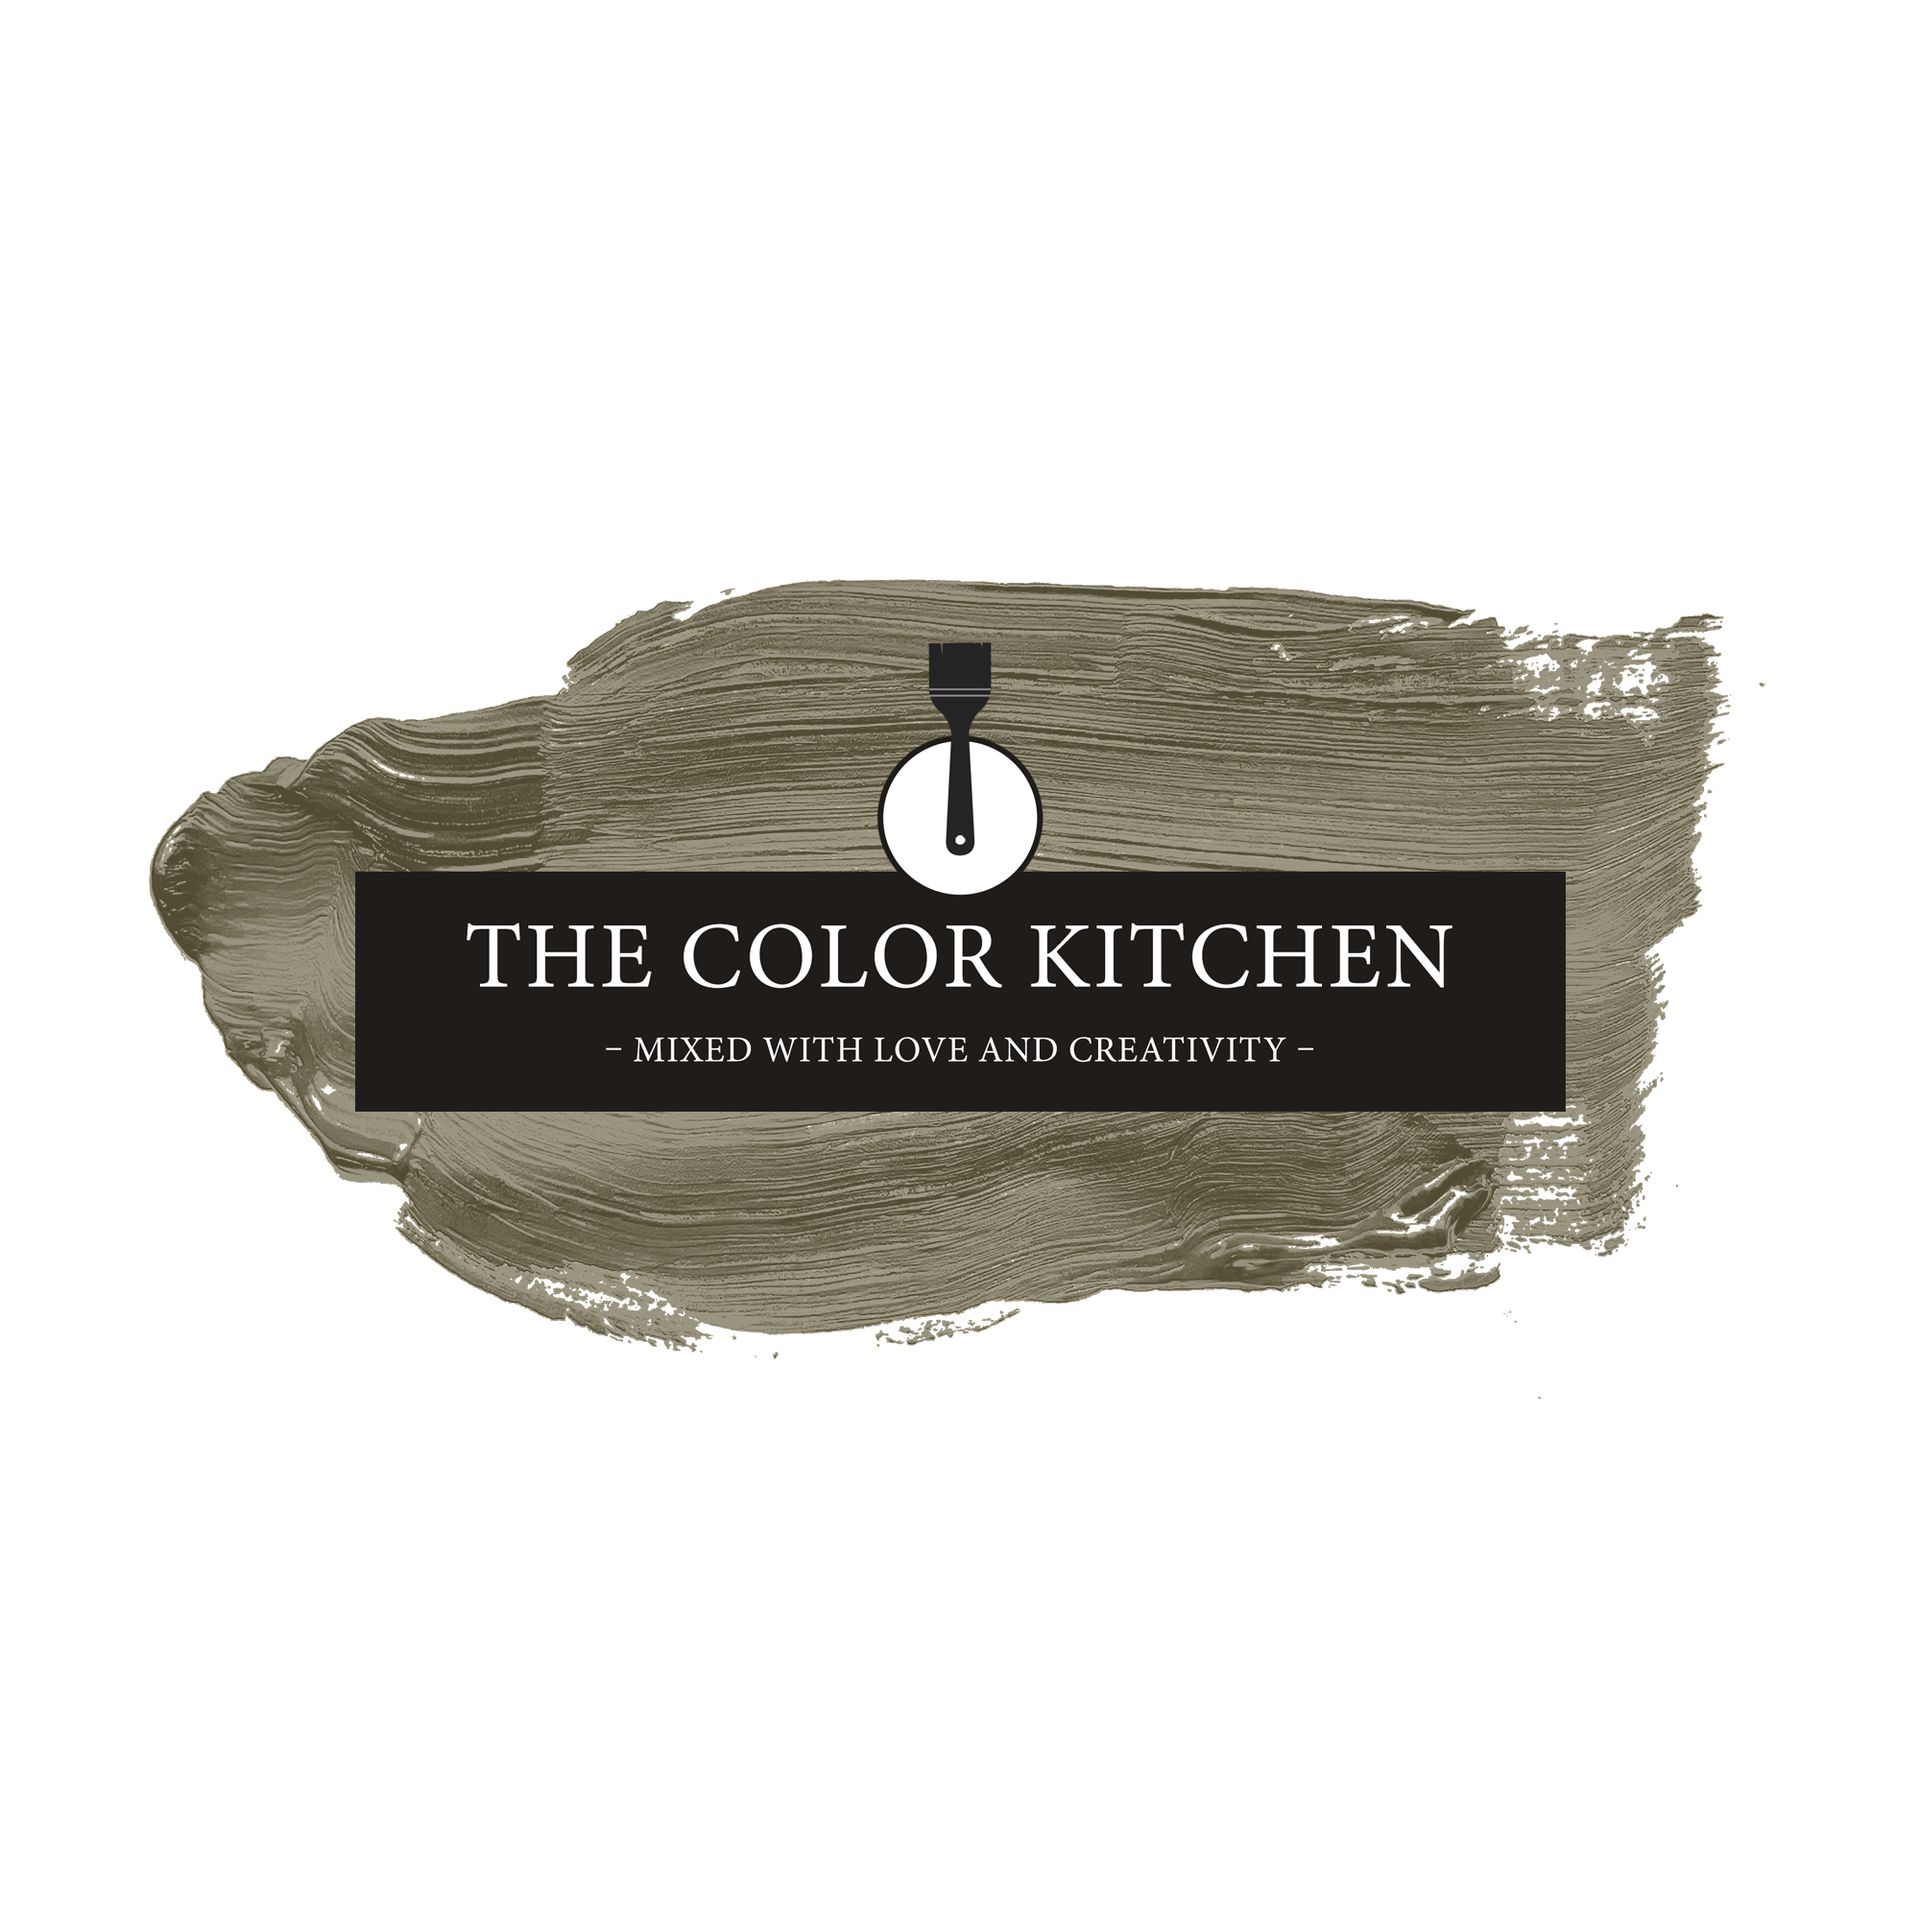 Wandfarbe The Color Kitchen TCK4013 Ordinary Olive